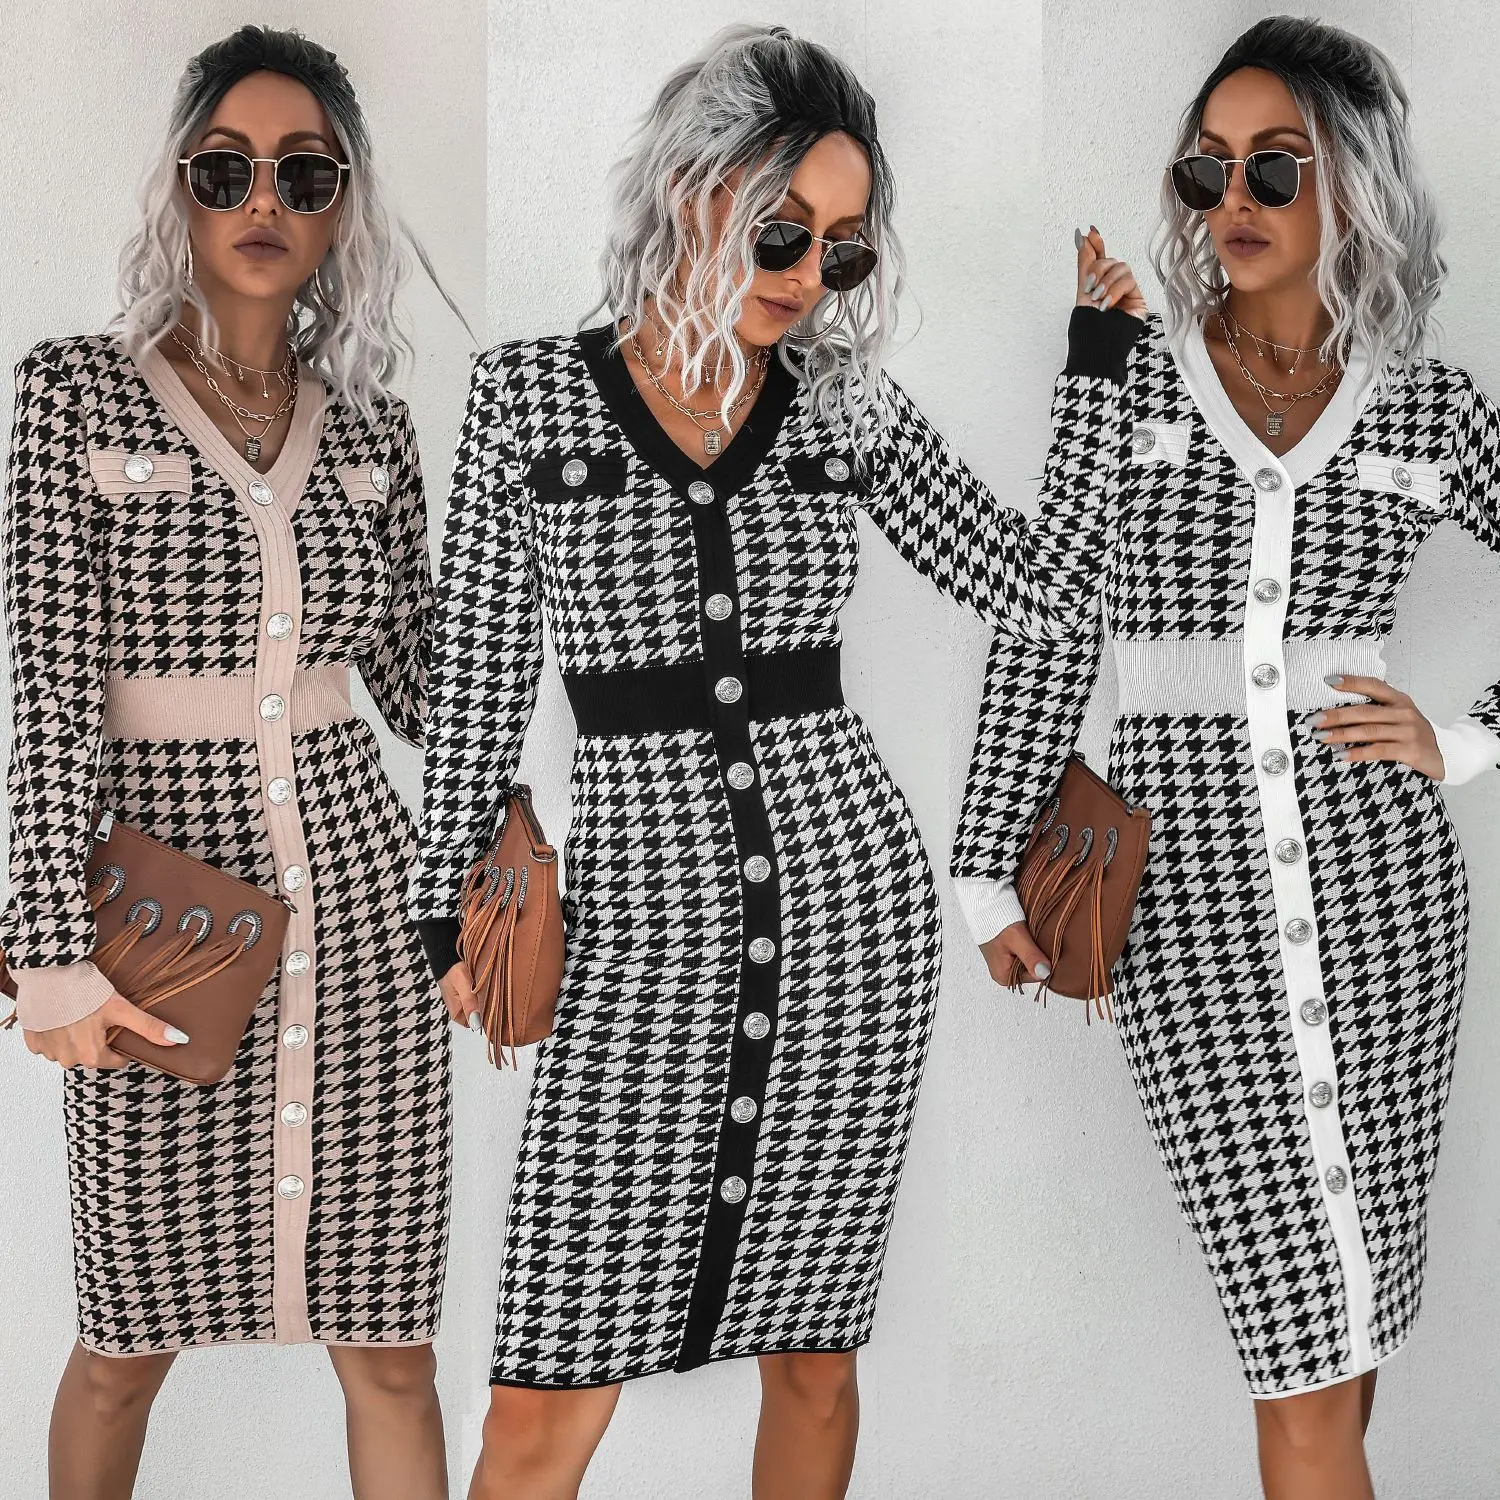 

Women's spring and autumn long sleeves Houndstooth Print Contrast Binding Buttoned Knit Dress Female Casual party fashion Dress